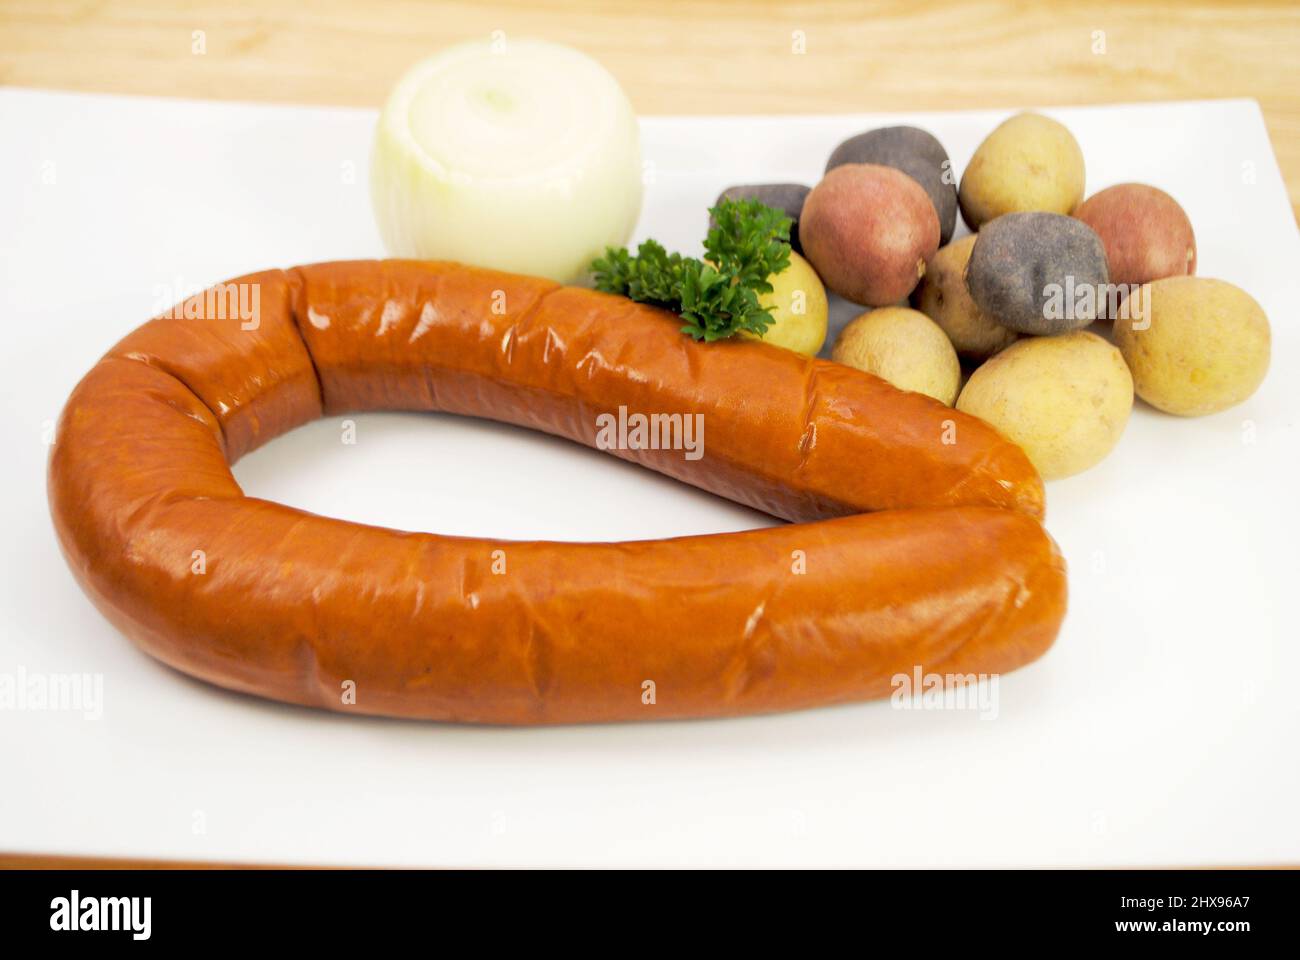 Spicy Whole Smoked Kielbasa, with Tri0colored Potatoes and an Onion Stock Photo